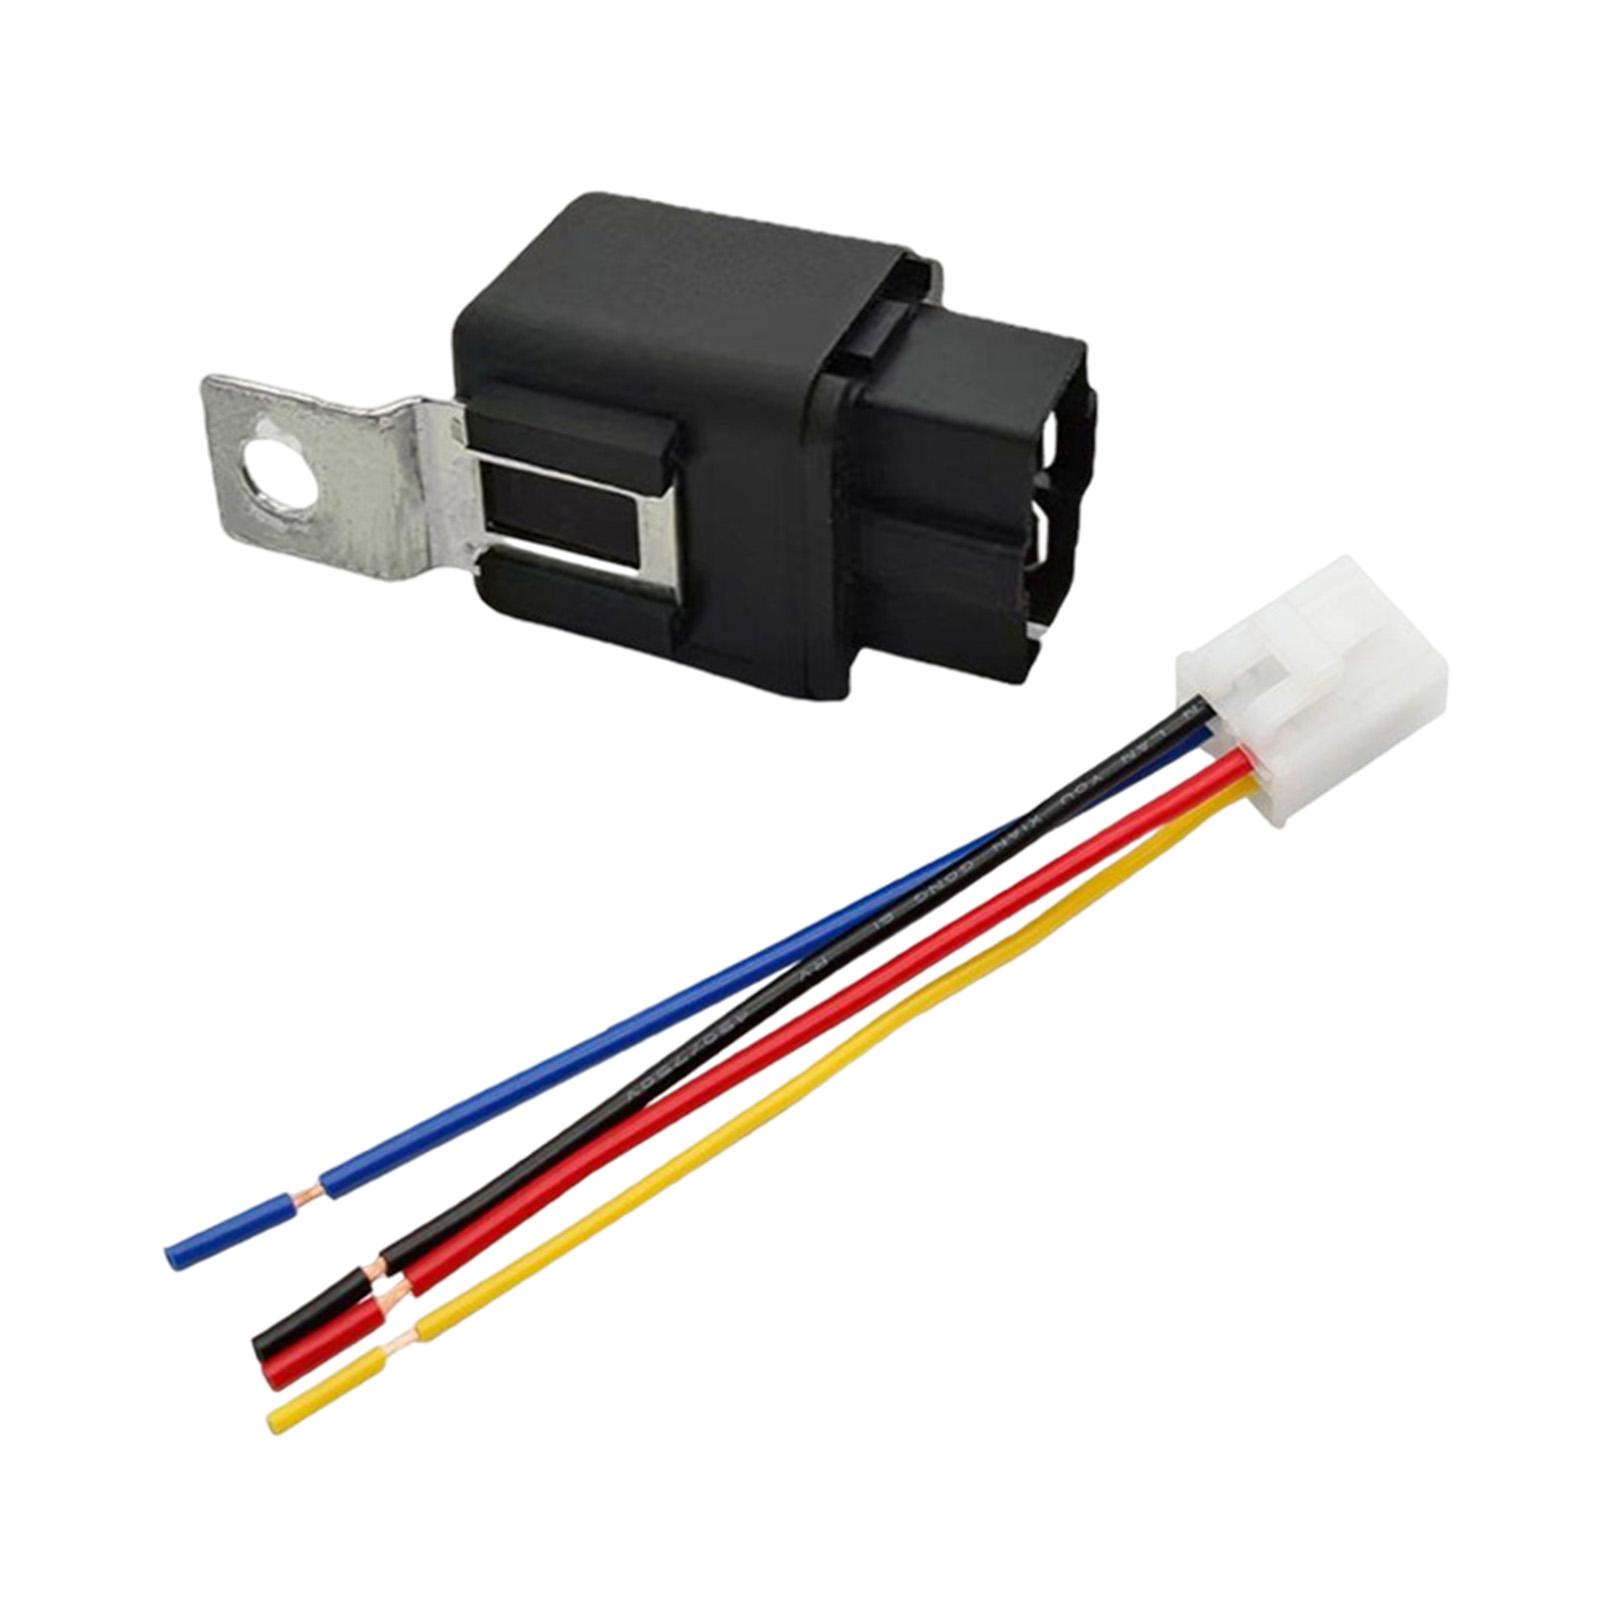 Automotive Relay Accessories Replacement for Air Conditioning Vehicles 24V with socket